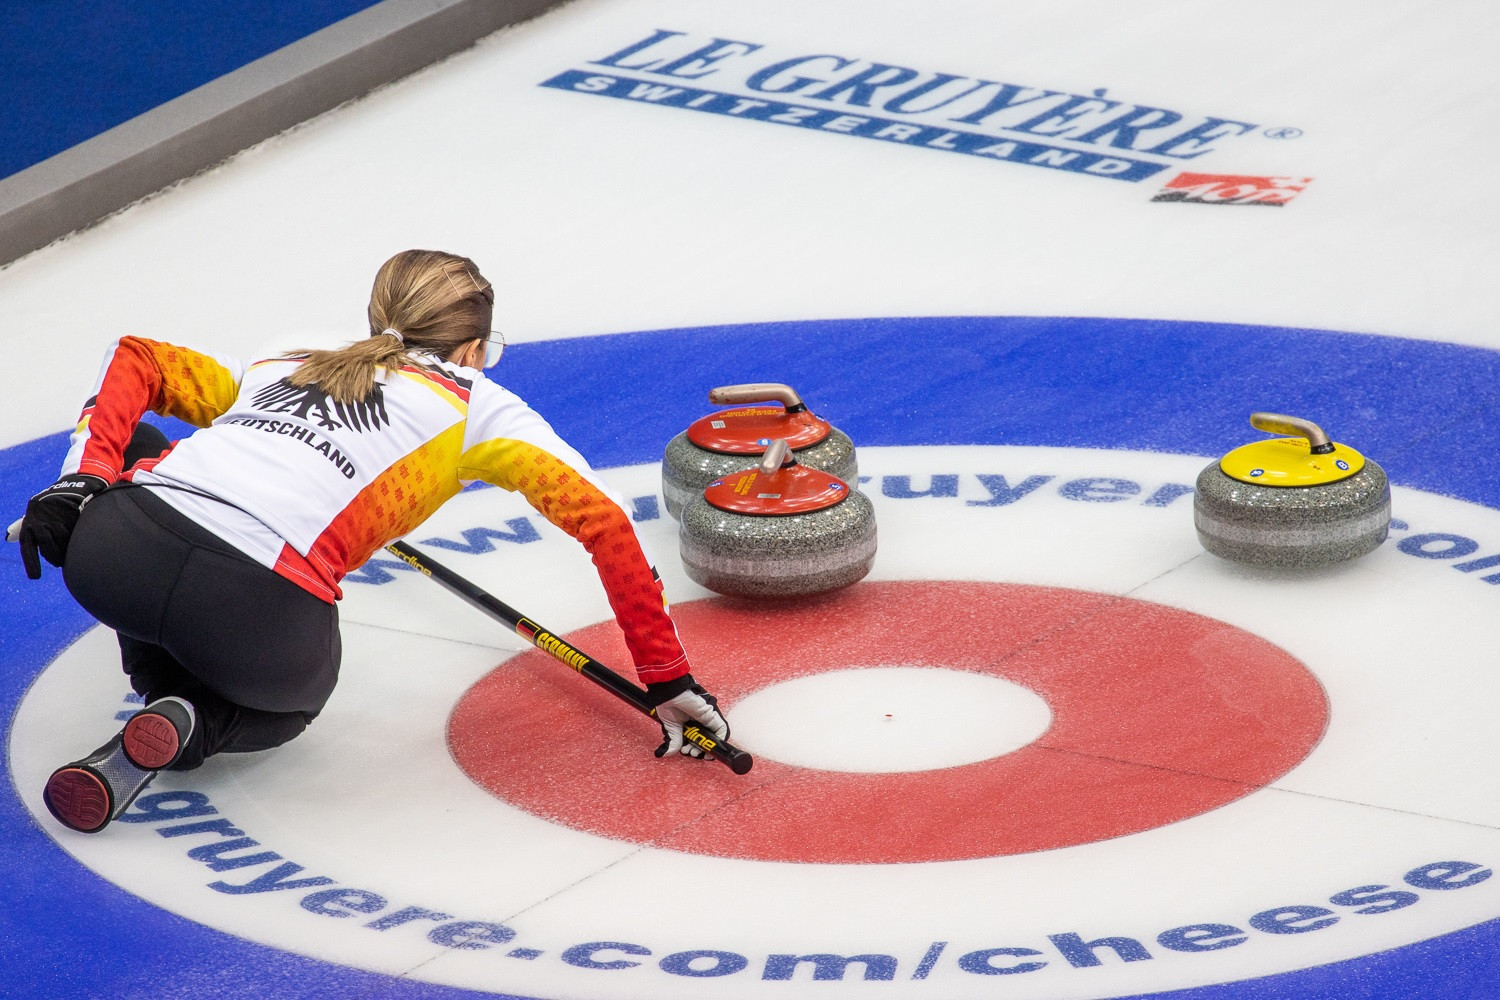 Three positive COVID-19 cases associated with the European Curling Championships in Lillehammer have been confirmed by the WCF ©WCF